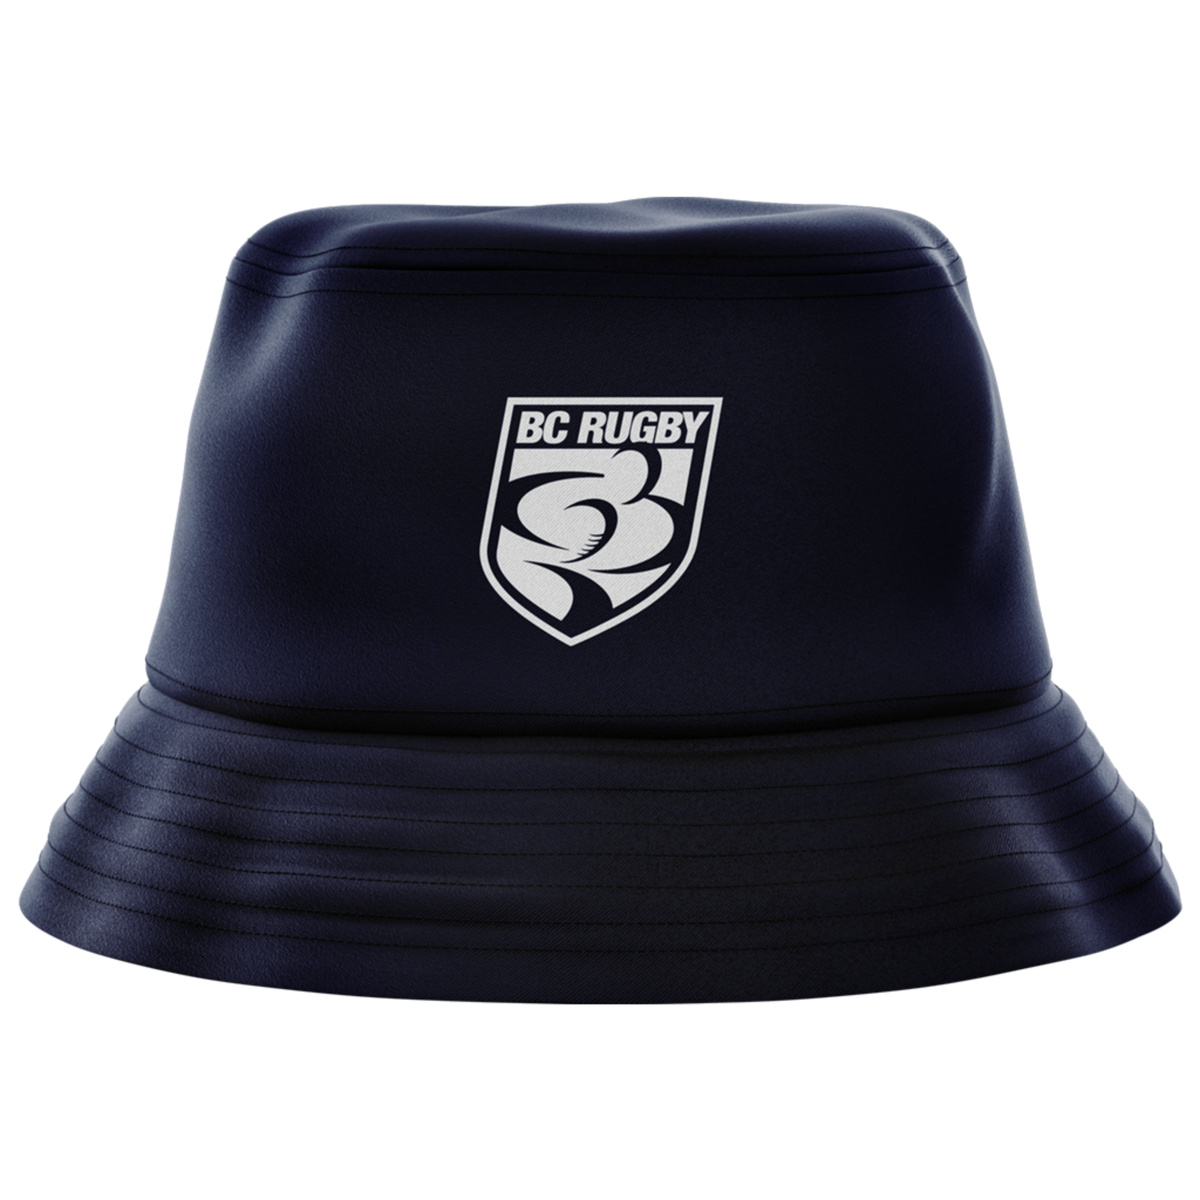 BC Rugby Shield 2022 Bucket Hat - www.therugbyshop.com www.therugbyshop.com ADULT UNISEX / NAVY W/ SHIELD / O/S XIX Brands HEADWEAR BC Rugby Shield 2022 Bucket Hat